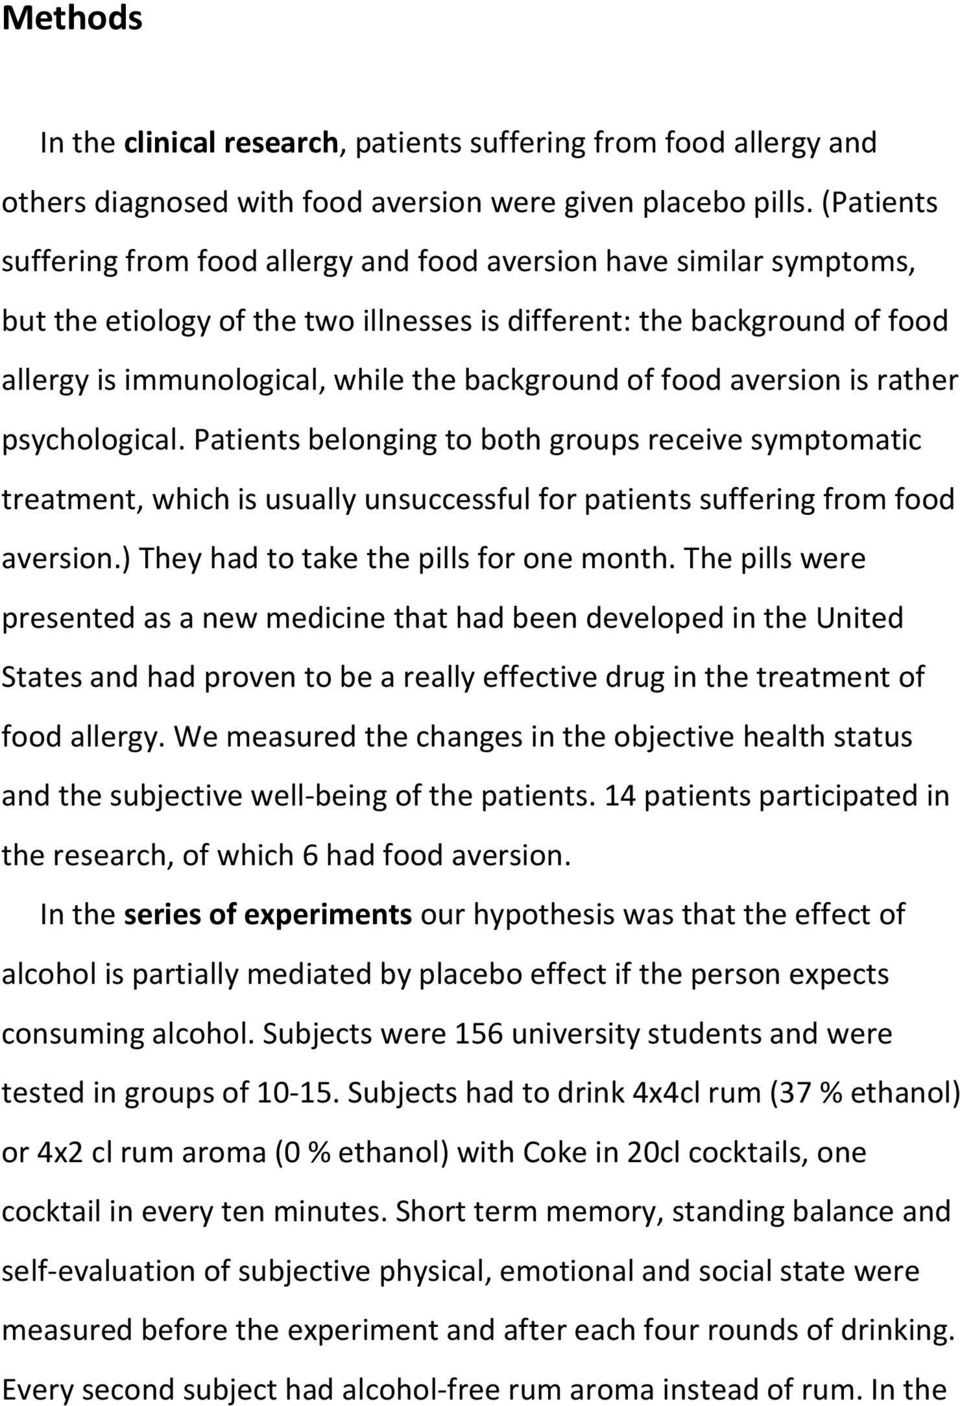 background of food aversion is rather psychological. Patients belonging to both groups receive symptomatic treatment, which is usually unsuccessful for patients suffering from food aversion.